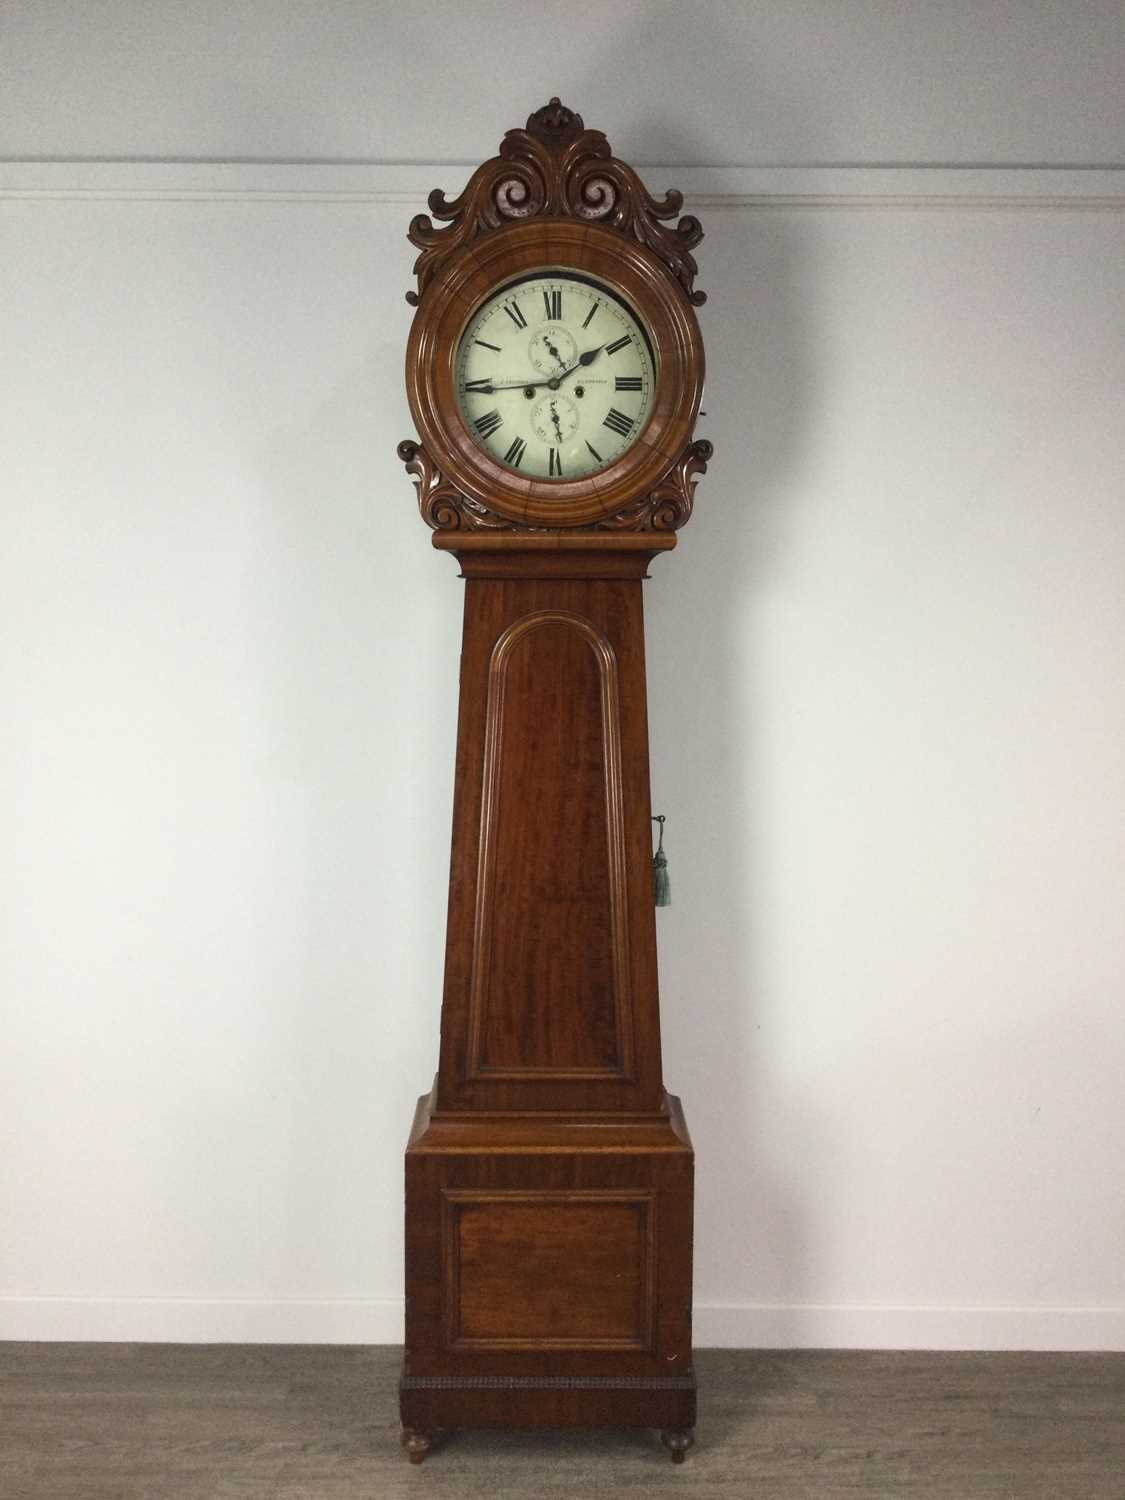 Lot 1196 - A GOOD 19TH CENTURY SCOTTISH EIGHT DAY LONGCASE CLOCK BY J. CARSWELL OF KILMARNOCK